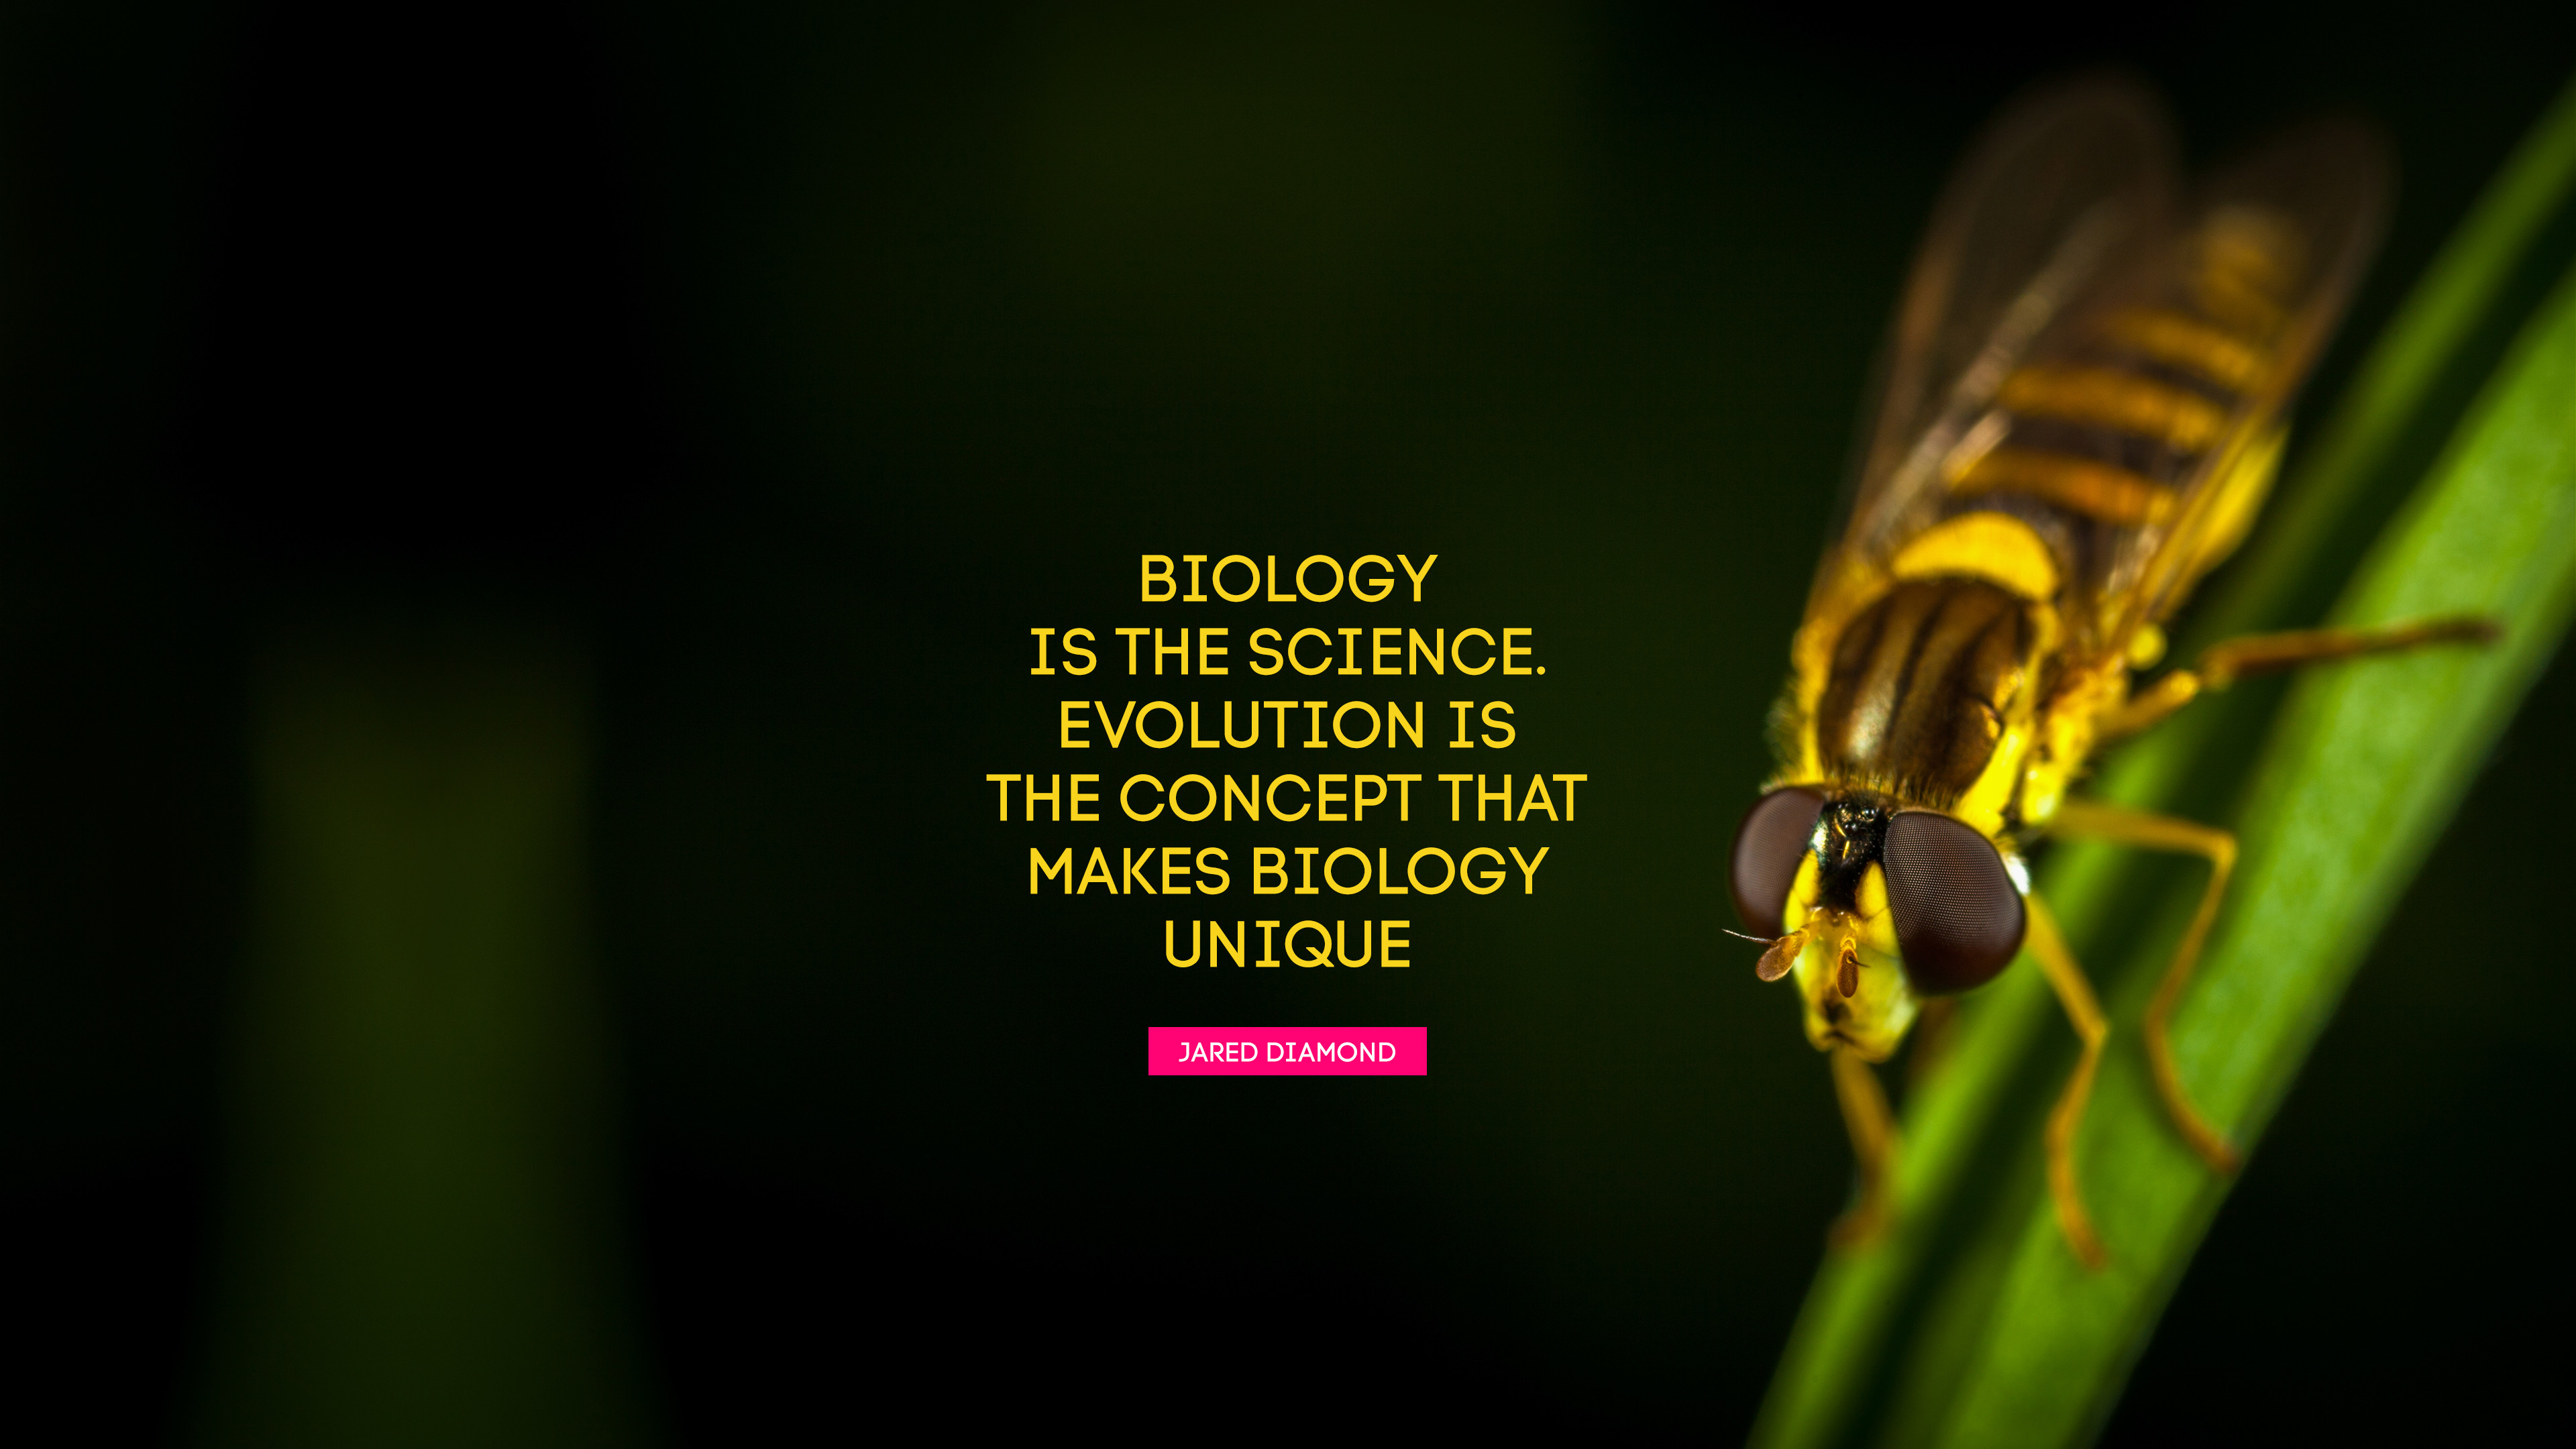 Biology is the science. Evolution is the concept that makes biology